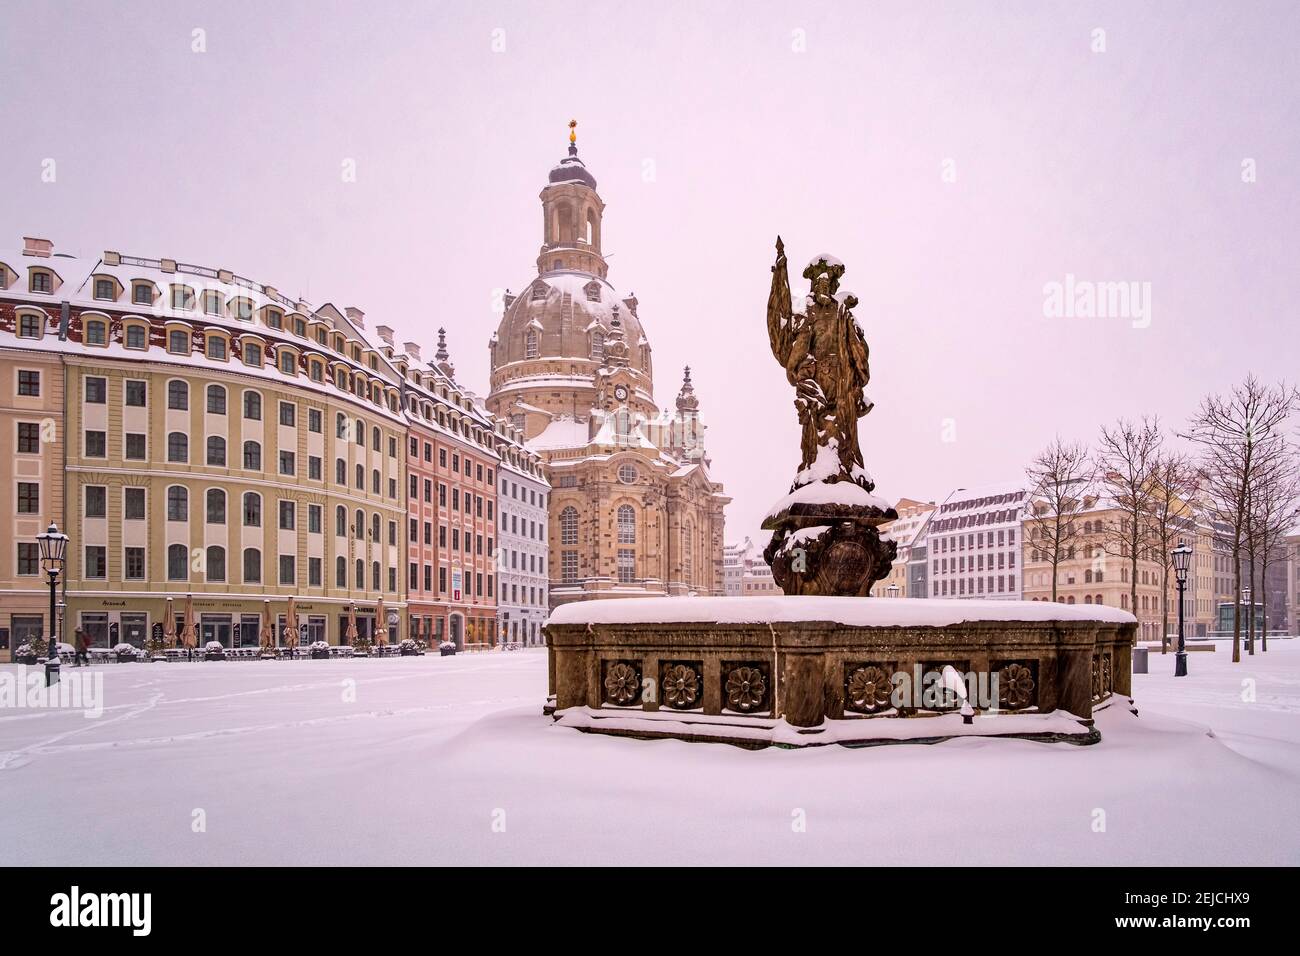 Panoramic view of the square Neumarkt, the fountain Friedensbrunnen and the Church of our Lady in winter, the square covered in snow. Stock Photo